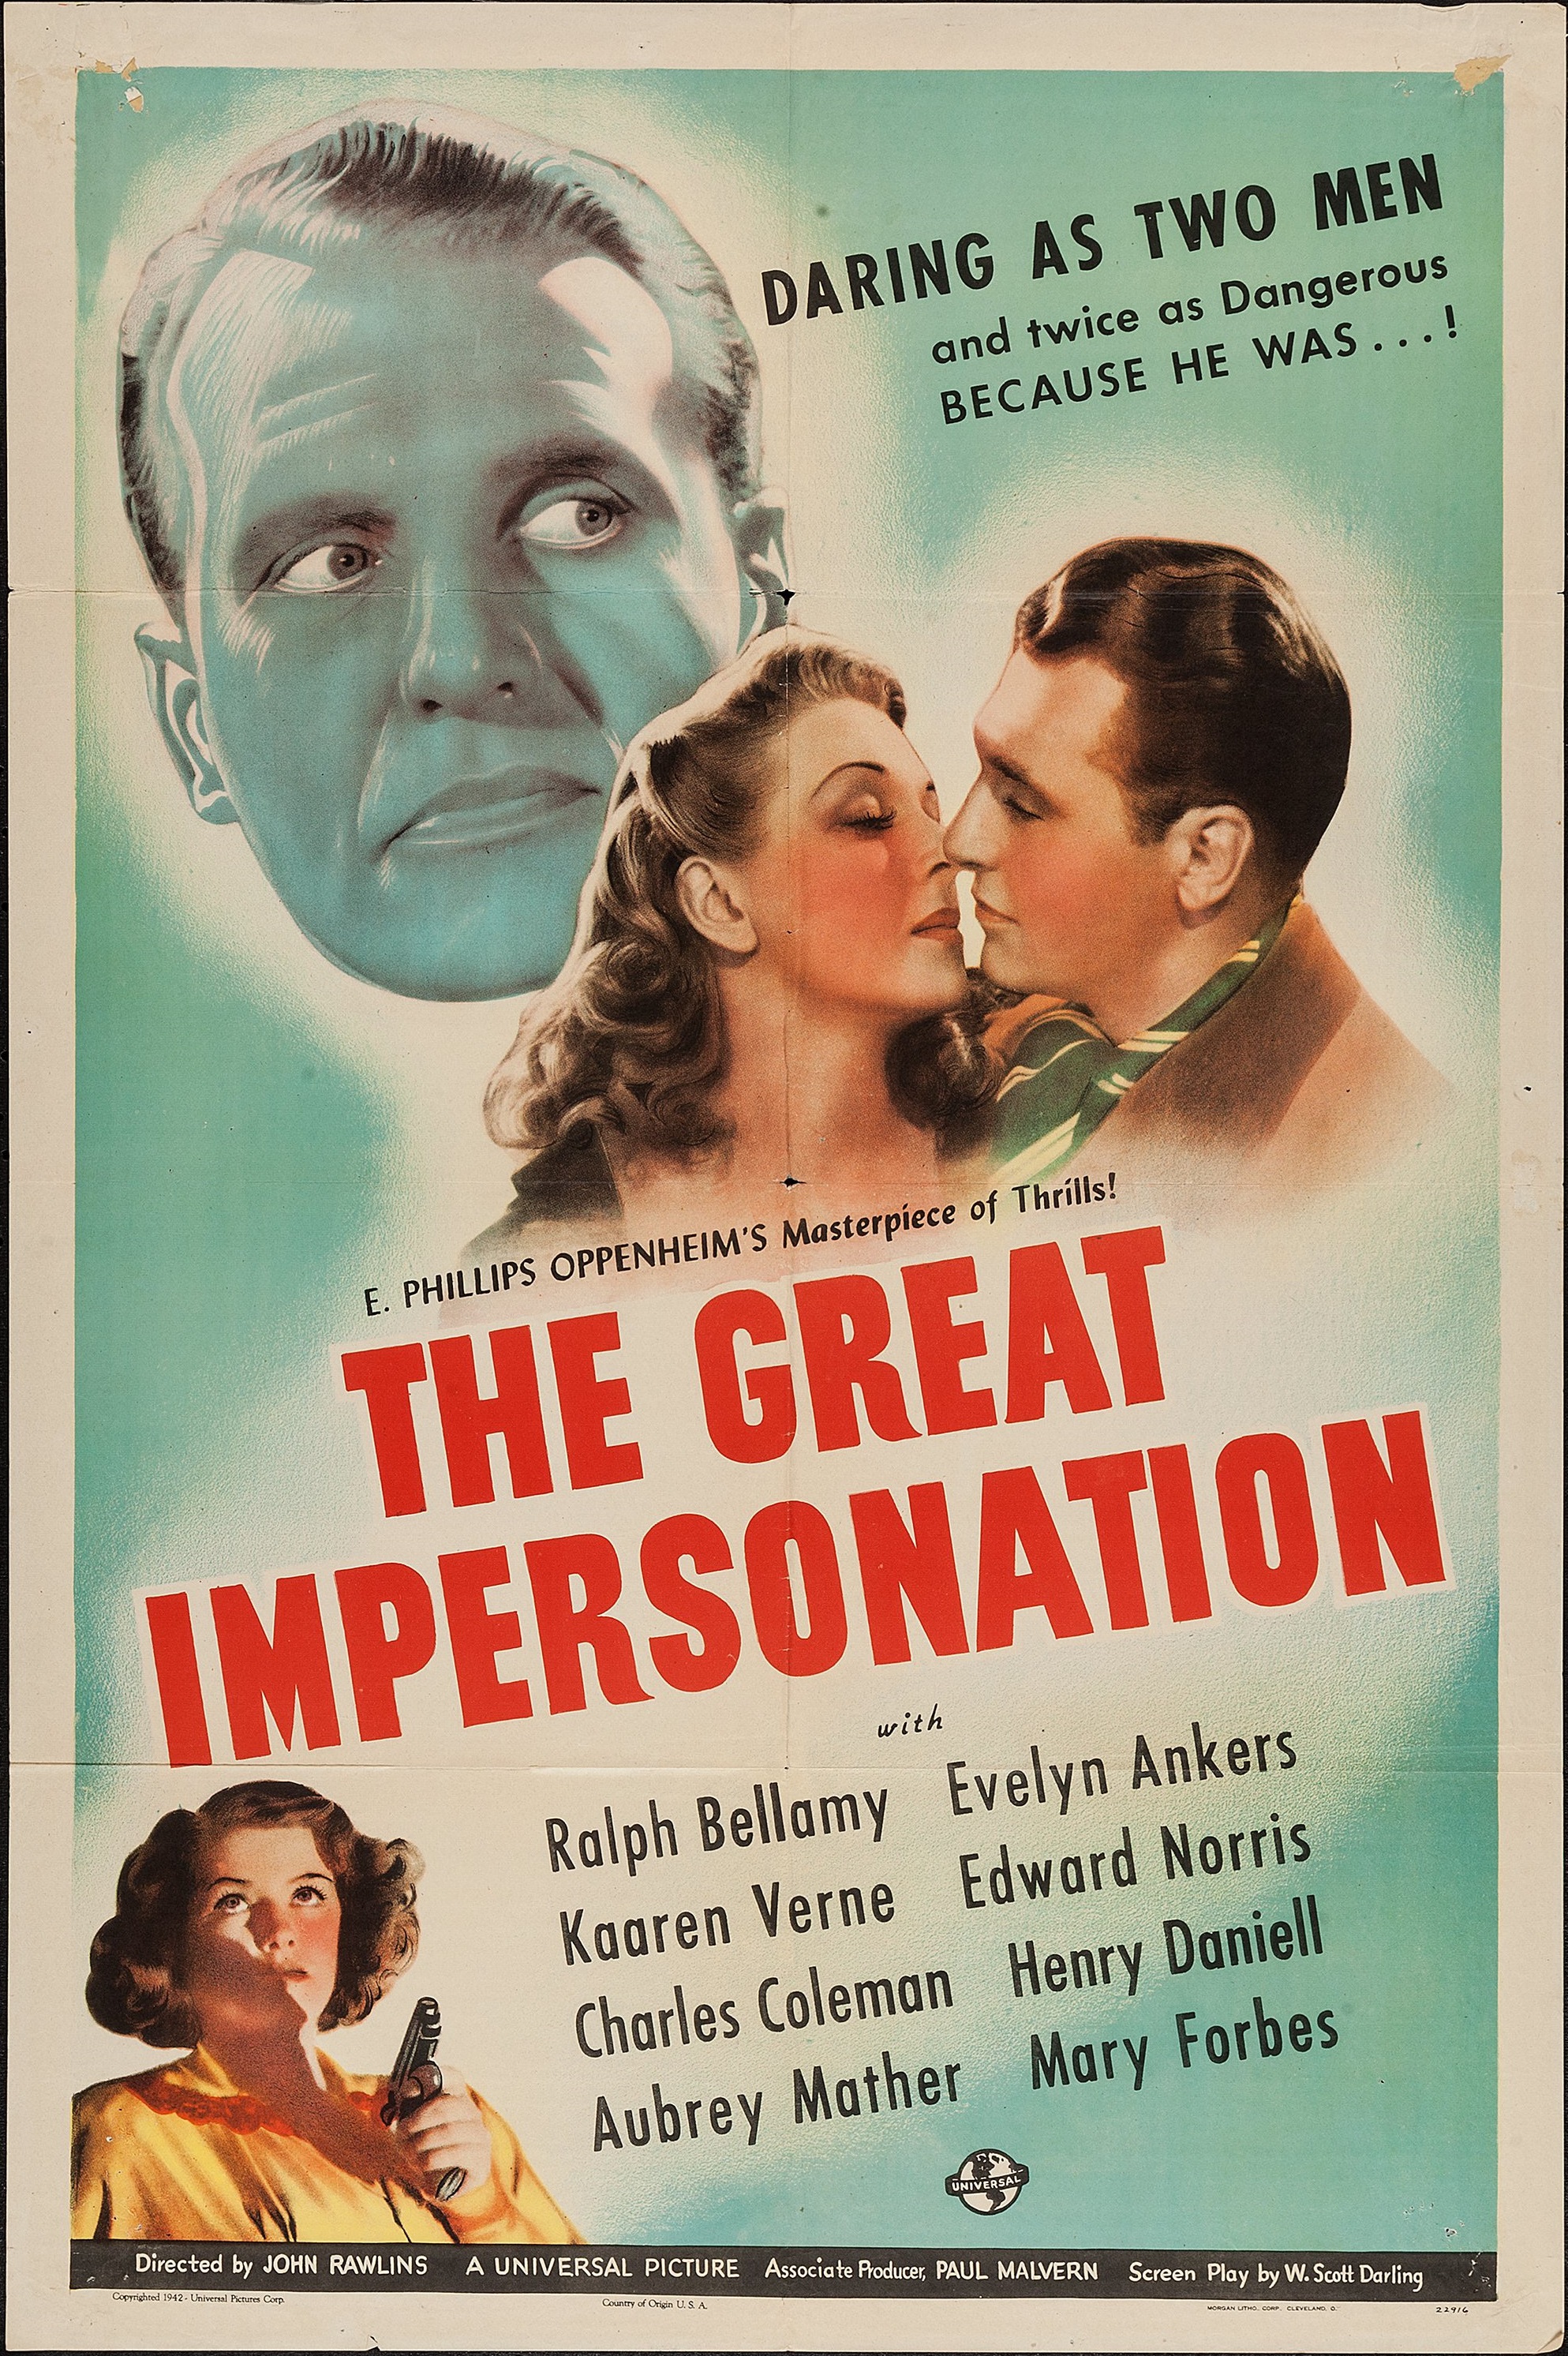 The Great Impersonation (1942) Screenshot 4 